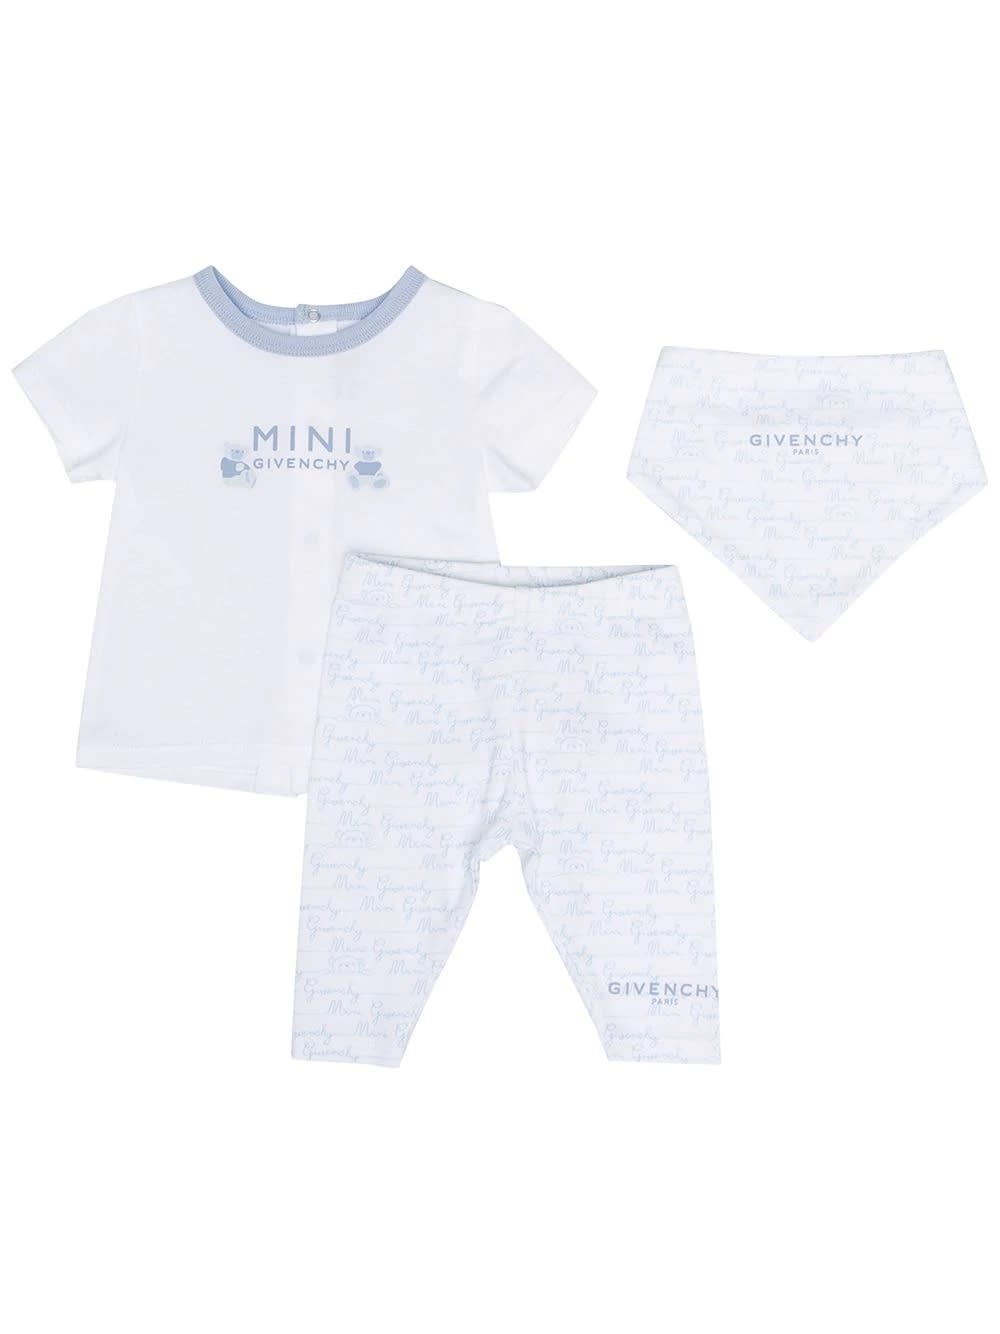 Givenchy Babies' Complete With Print In Light Blue